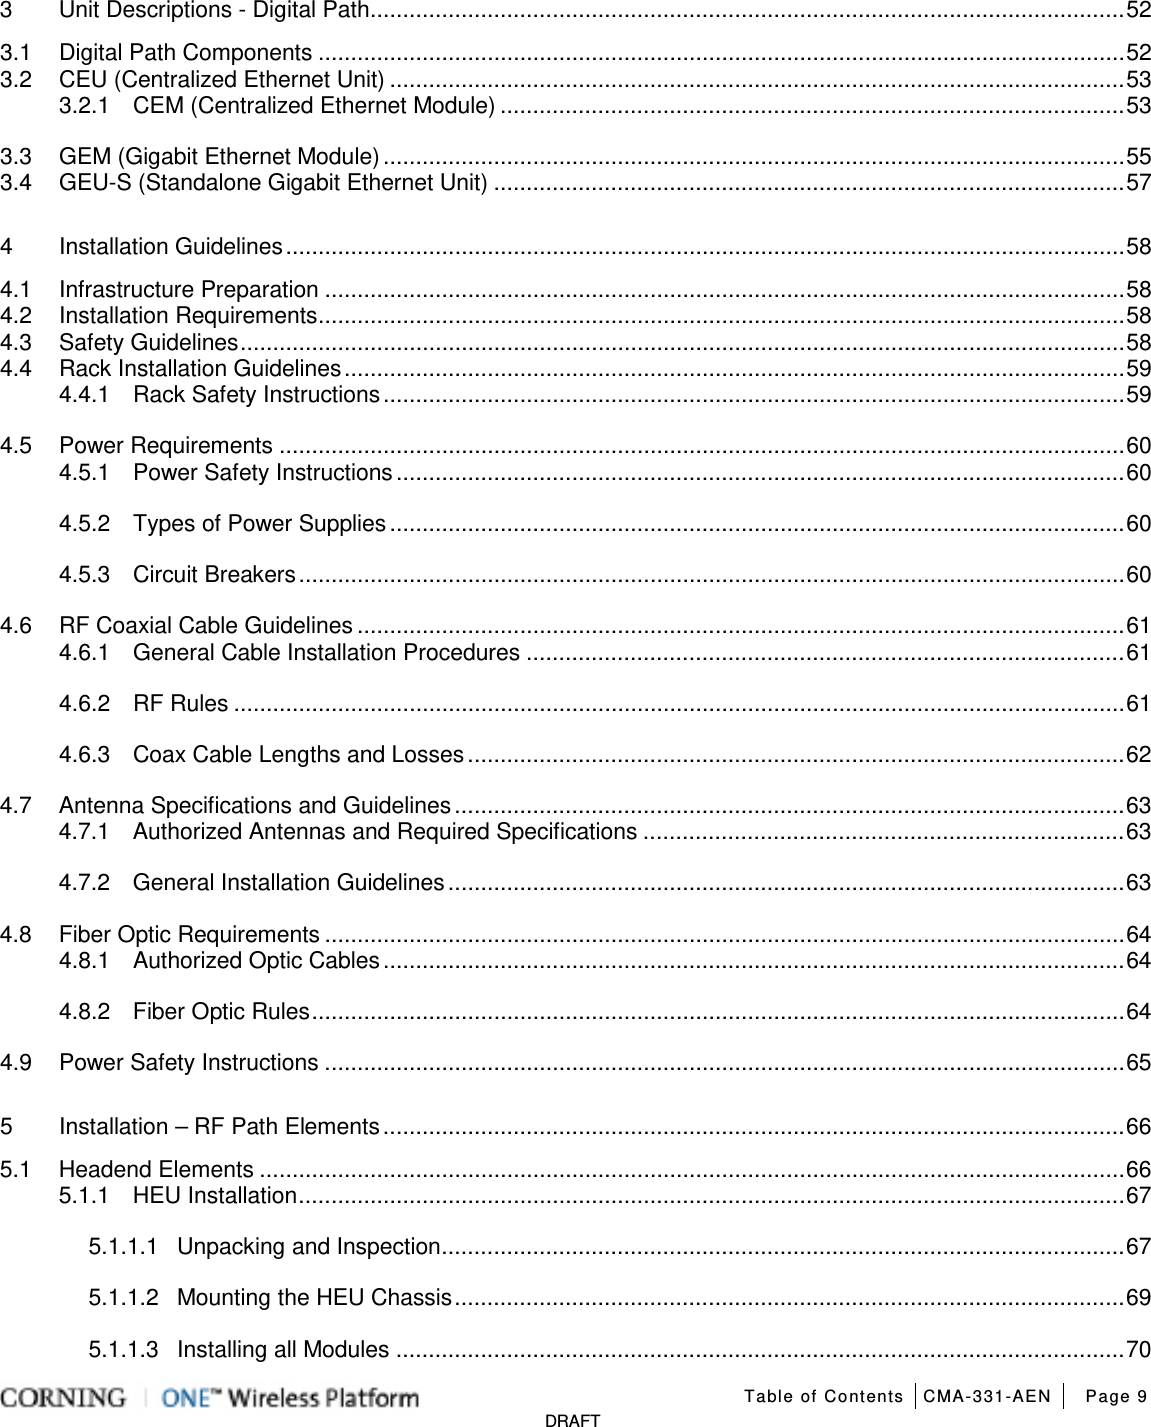   Table of Contents CMA-331-AEN Page 9   DRAFT 3 Unit Descriptions - Digital Path .................................................................................................................... 52 3.1 Digital Path Components ............................................................................................................................ 52 3.2 CEU (Centralized Ethernet Unit) ................................................................................................................. 53 3.2.1 CEM (Centralized Ethernet Module) ................................................................................................ 53 3.3 GEM (Gigabit Ethernet Module) .................................................................................................................. 55 3.4 GEU-S (Standalone Gigabit Ethernet Unit) ................................................................................................. 57 4 Installation Guidelines ................................................................................................................................. 58 4.1 Infrastructure Preparation ........................................................................................................................... 58 4.2 Installation Requirements ............................................................................................................................ 58 4.3 Safety Guidelines ........................................................................................................................................ 58 4.4 Rack Installation Guidelines ........................................................................................................................ 59 4.4.1 Rack Safety Instructions .................................................................................................................. 59 4.5 Power Requirements .................................................................................................................................. 60 4.5.1 Power Safety Instructions ................................................................................................................ 60 4.5.2 Types of Power Supplies ................................................................................................................. 60 4.5.3 Circuit Breakers ............................................................................................................................... 60 4.6 RF Coaxial Cable Guidelines ...................................................................................................................... 61 4.6.1 General Cable Installation Procedures ............................................................................................ 61 4.6.2 RF Rules ......................................................................................................................................... 61 4.6.3 Coax Cable Lengths and Losses ..................................................................................................... 62 4.7 Antenna Specifications and Guidelines ....................................................................................................... 63 4.7.1 Authorized Antennas and Required Specifications .......................................................................... 63 4.7.2 General Installation Guidelines ........................................................................................................ 63 4.8 Fiber Optic Requirements ........................................................................................................................... 64 4.8.1 Authorized Optic Cables .................................................................................................................. 64 4.8.2 Fiber Optic Rules ............................................................................................................................. 64 4.9 Power Safety Instructions ........................................................................................................................... 65 5 Installation – RF Path Elements .................................................................................................................. 66 5.1 Headend Elements ..................................................................................................................................... 66 5.1.1 HEU Installation ............................................................................................................................... 67 5.1.1.1 Unpacking and Inspection ......................................................................................................... 67 5.1.1.2 Mounting the HEU Chassis ....................................................................................................... 69 5.1.1.3 Installing all Modules ................................................................................................................ 70 